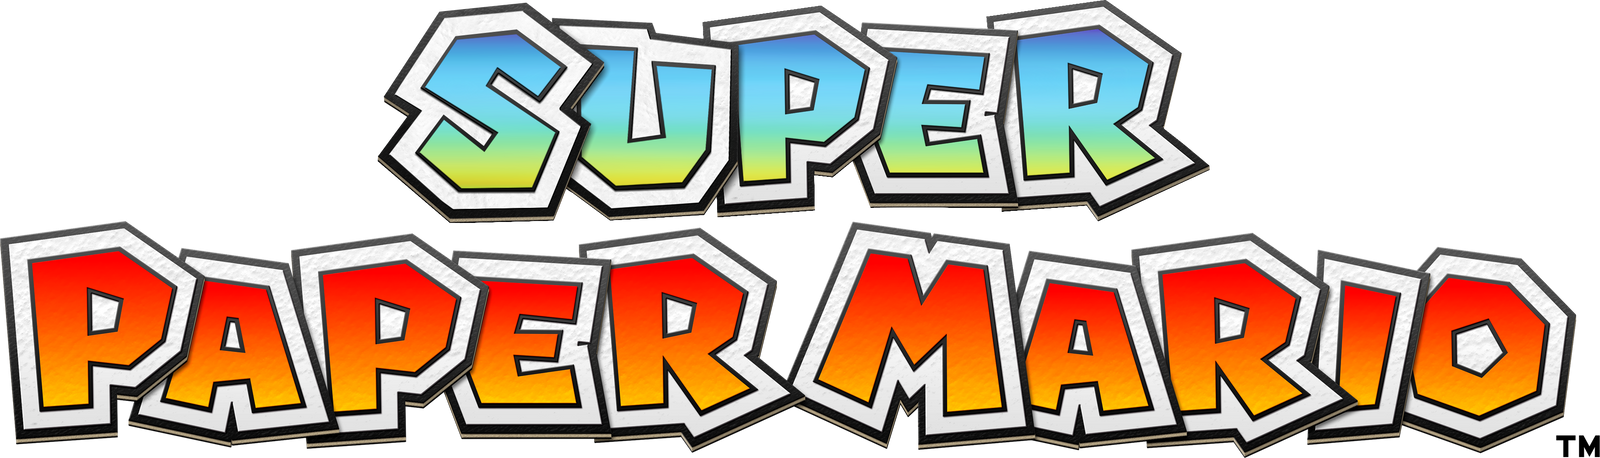 super_paper_mario_modern_logo_by_fawfulthegreat64-dcf5rjn.png